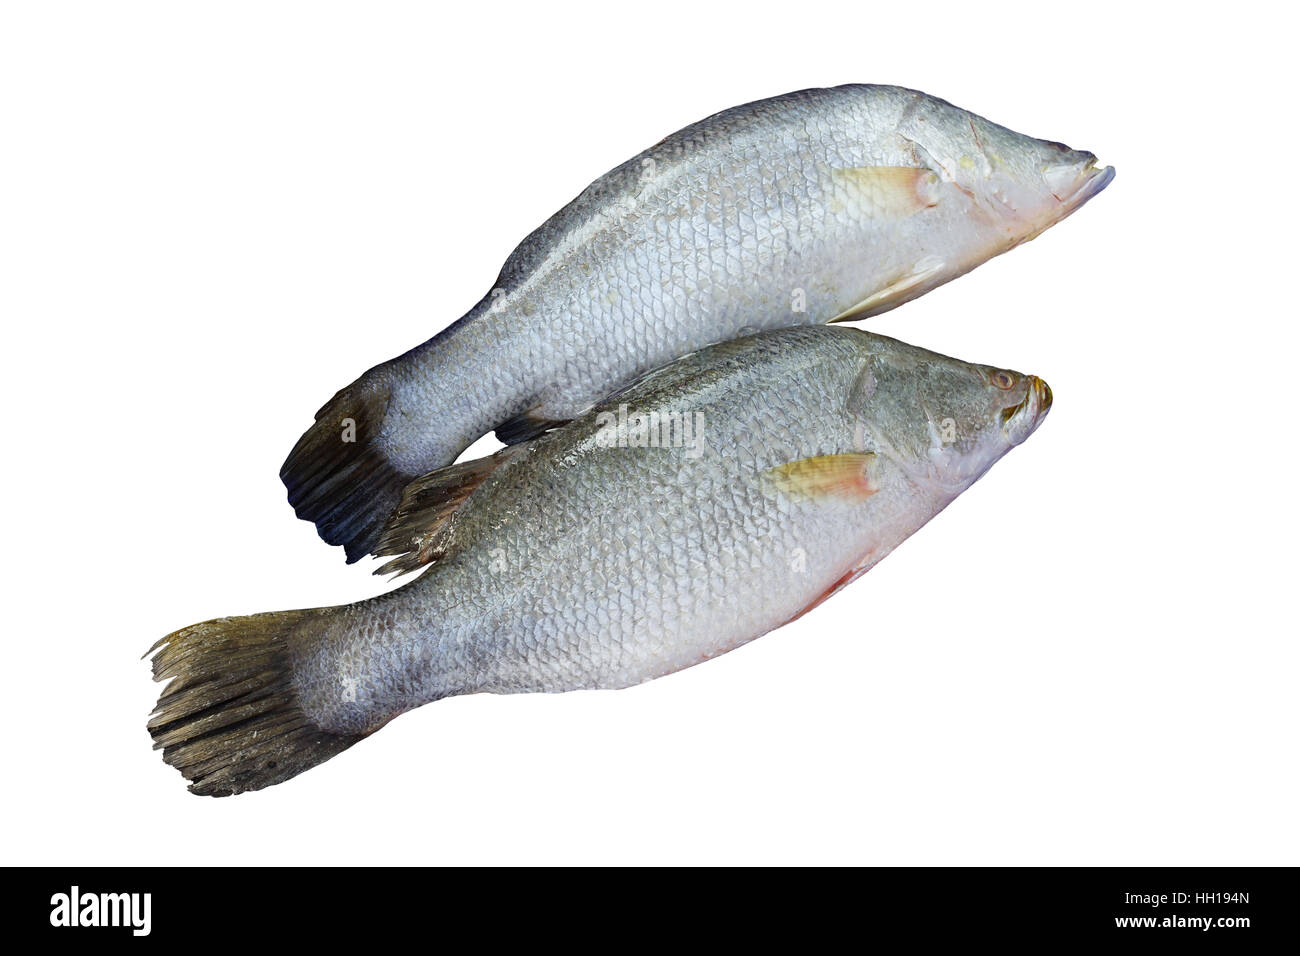 Pair of Silver perch or white perch isolated on white background Stock Photo